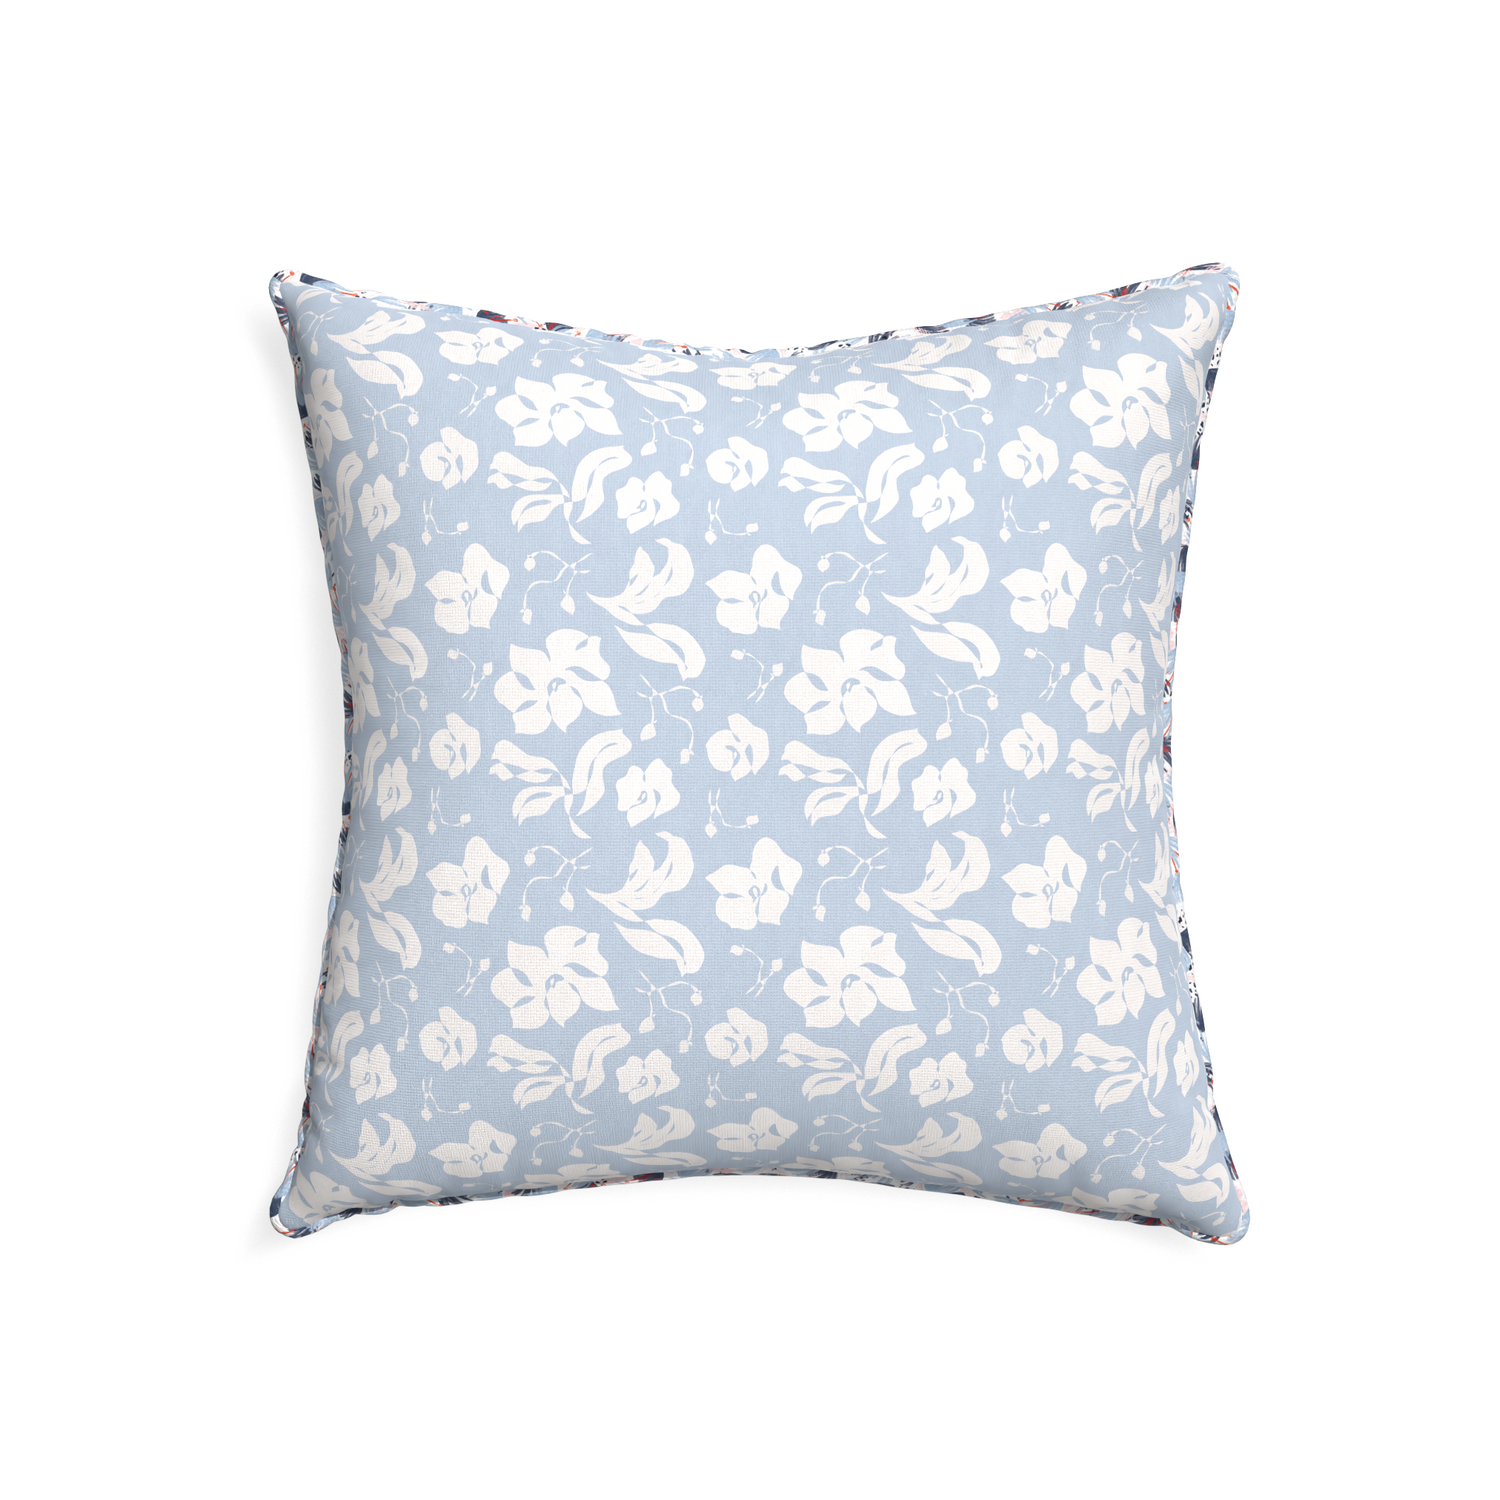 22-square georgia custom cornflower blue floralpillow with e piping on white background